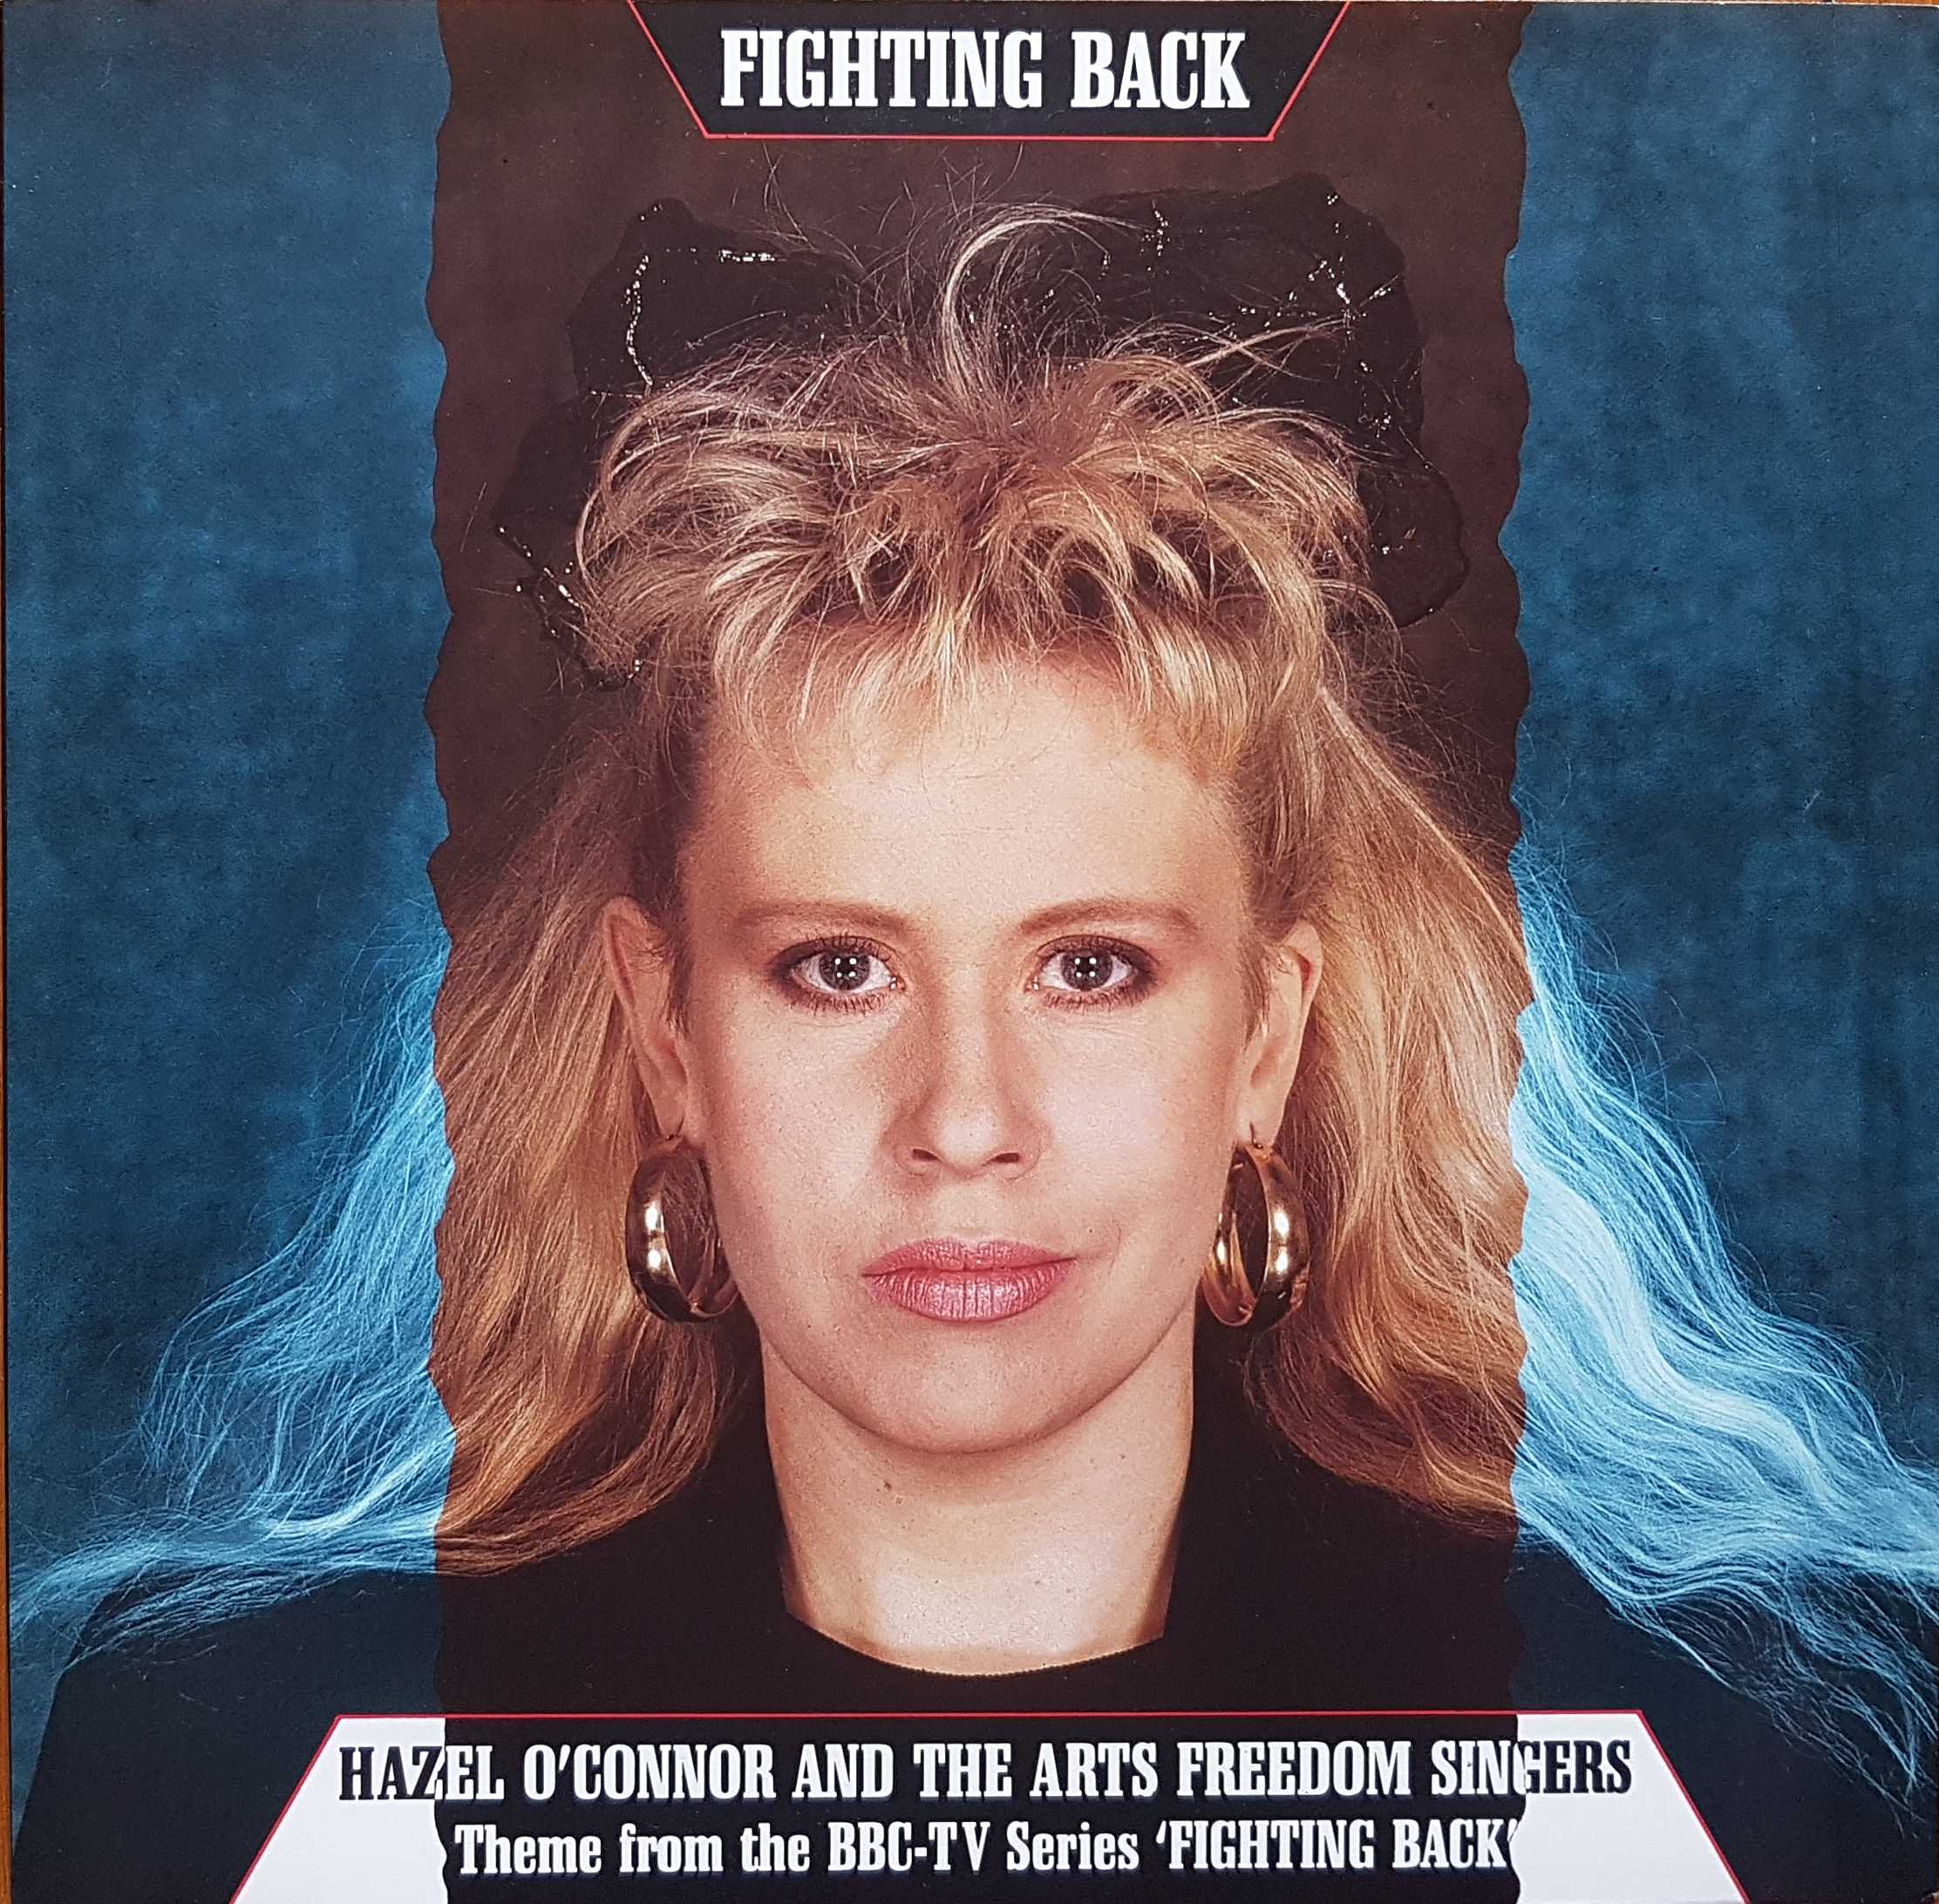 Picture of 12 RSL 182 Fighting back by artist Hazle O'Connor from the BBC 12inches - Records and Tapes library